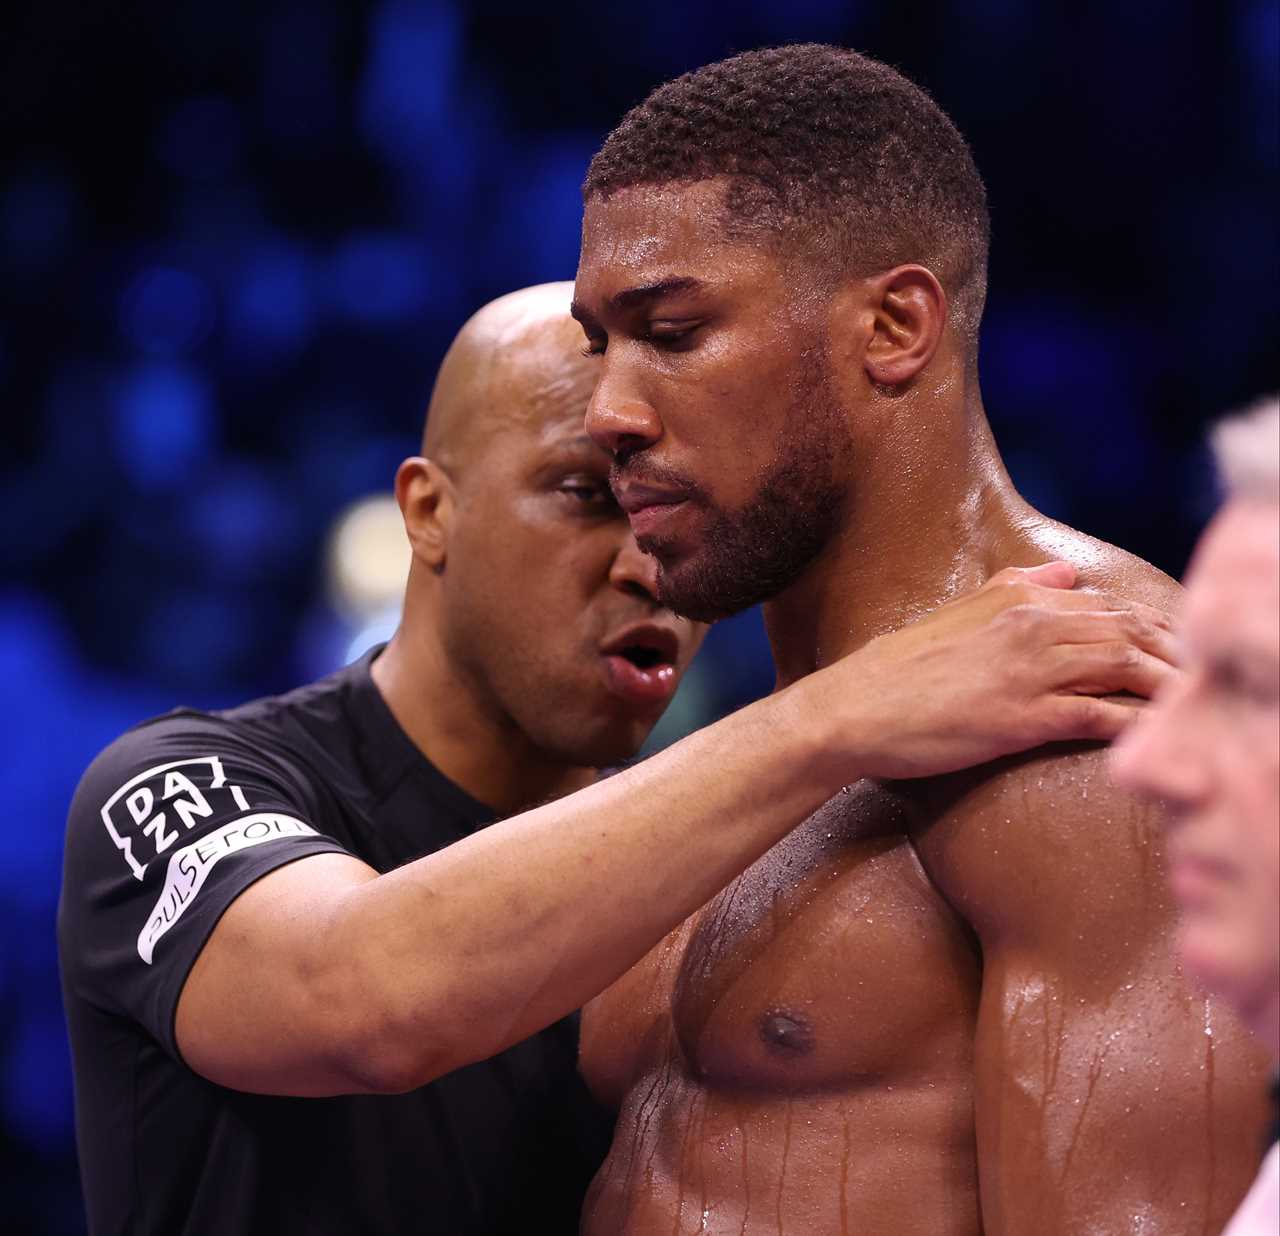 Anthony Joshua, 33 opens up about his fear of being injured in the ring, and wants to retire 'healthy.'